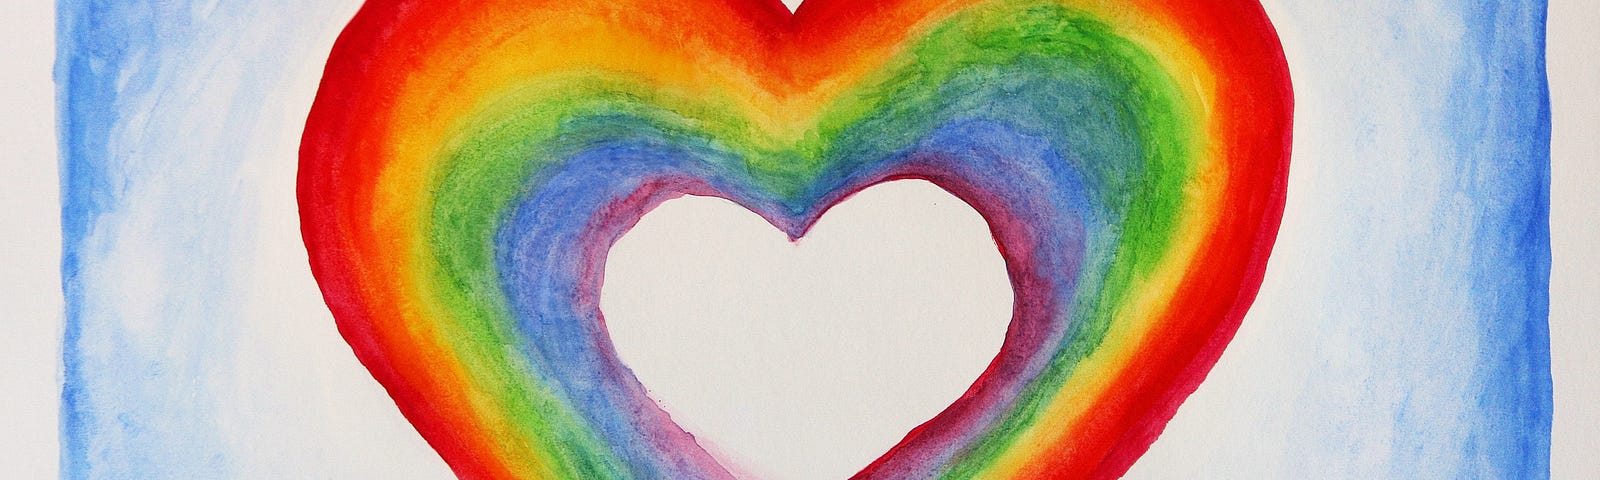 Watercolour of a rainbow shaped into a heart on a blue background.